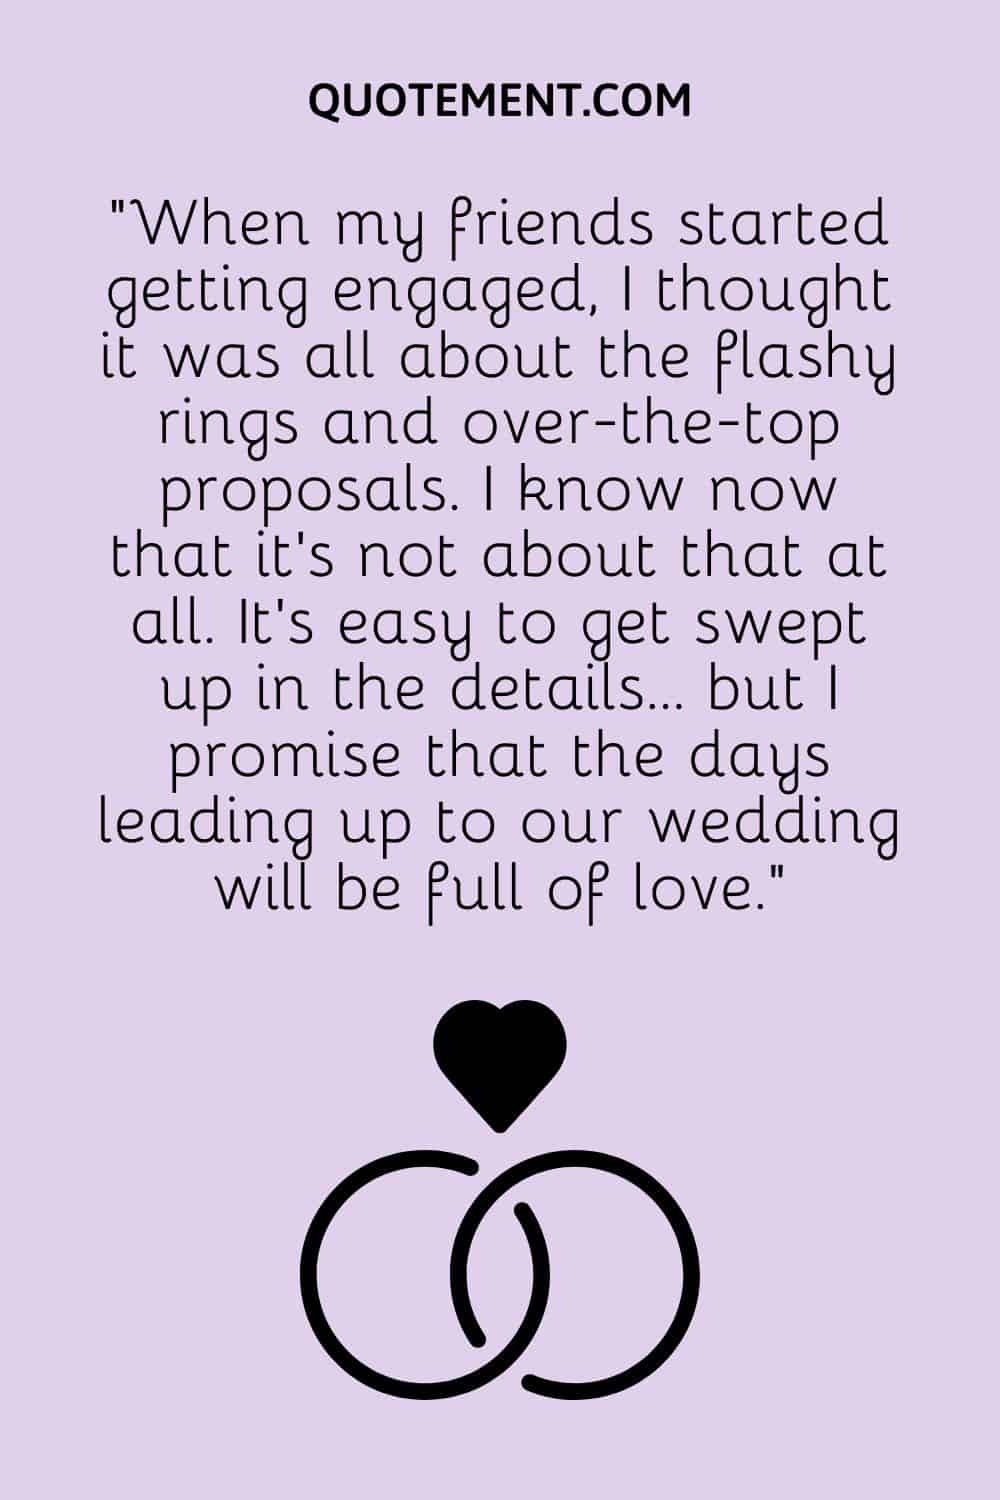 When my friends started getting engaged, I thought it was all about the flashy rings and over-the-top proposals